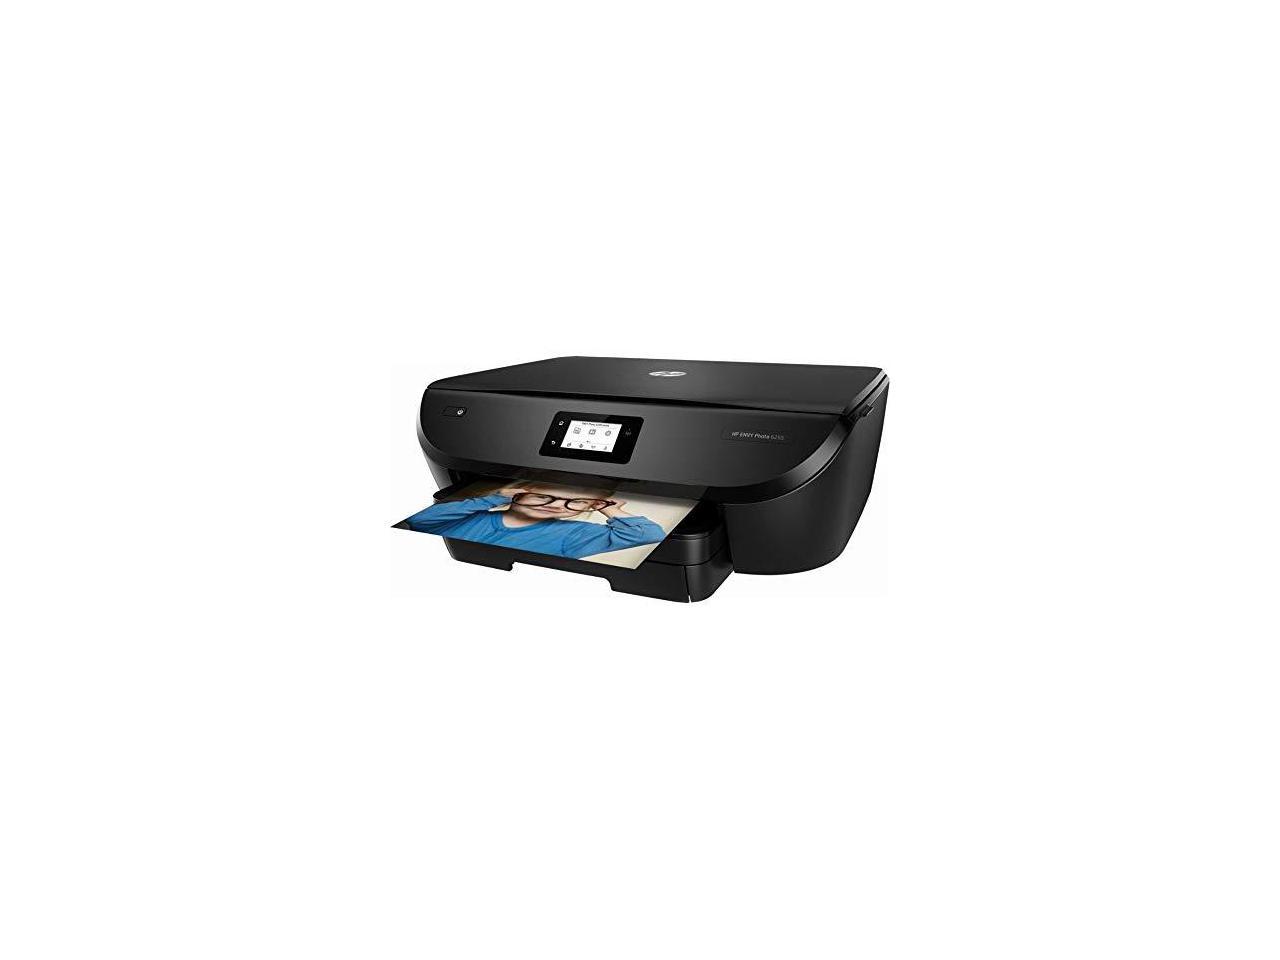 ENVY Photo 6255 AllinOne Printer with Wifi and Mobile Printing Renewed